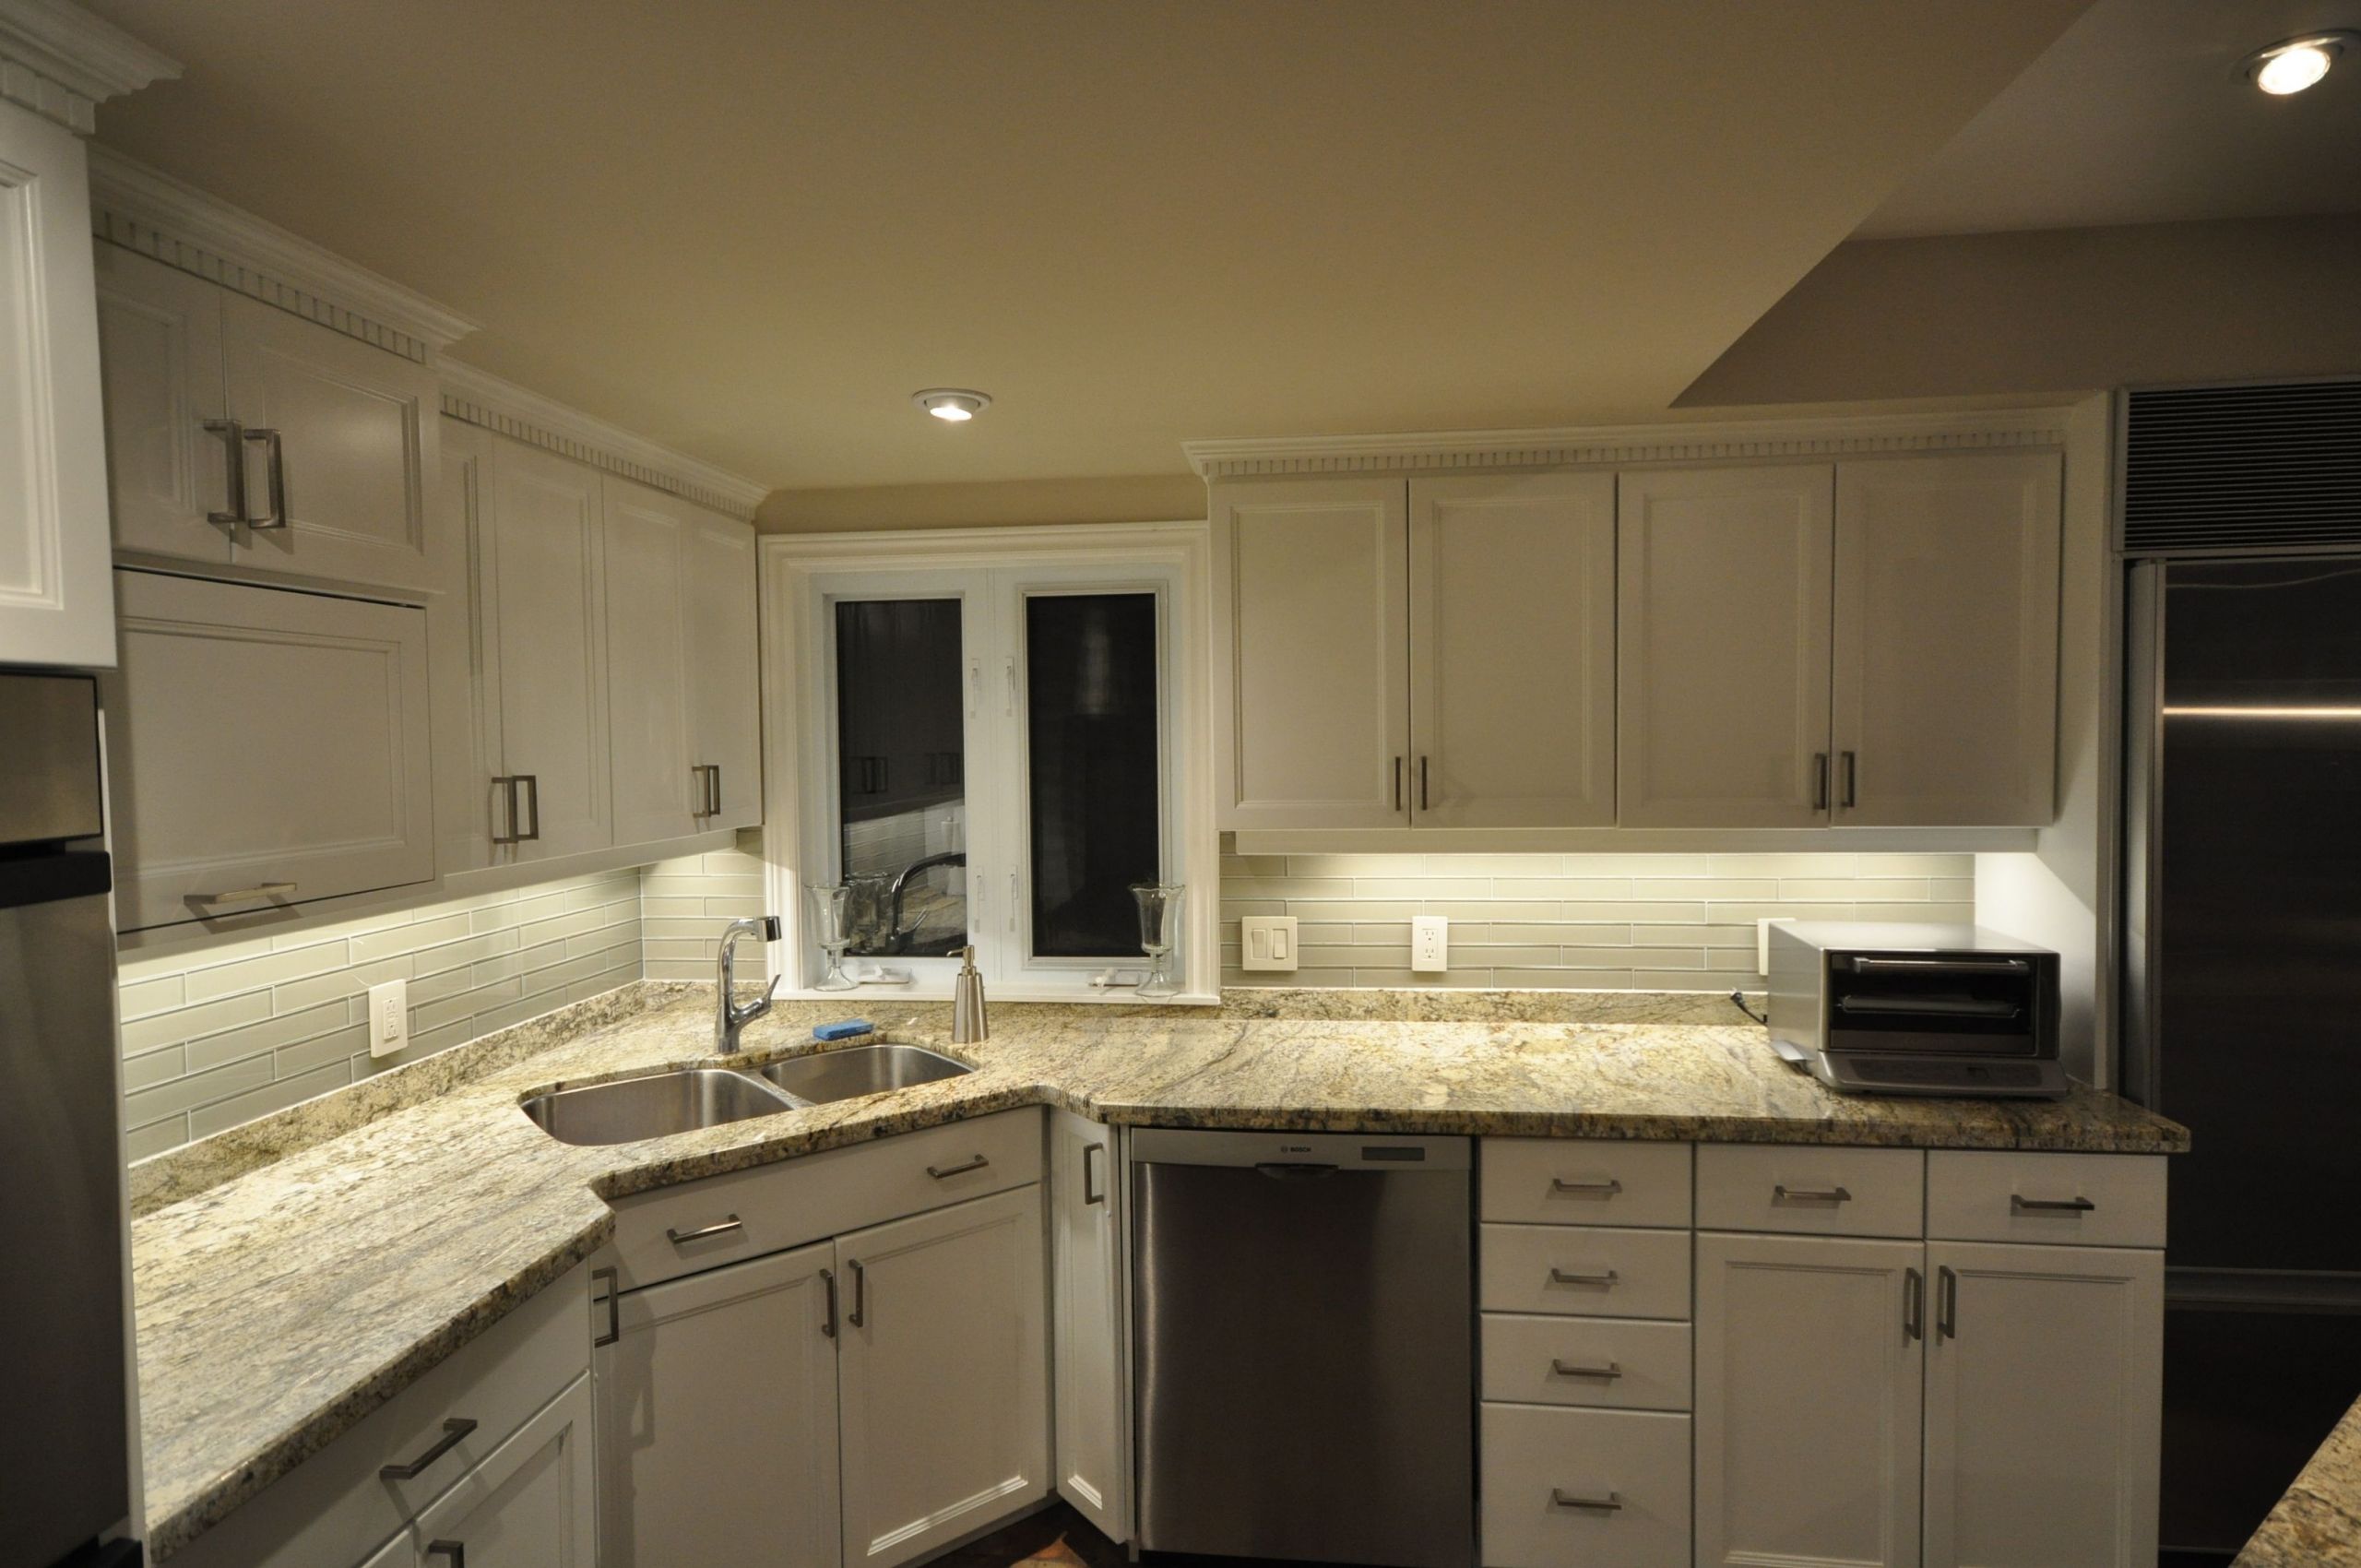 Led Lighting Under Cabinet Kitchen
 Pin on Under cabinet lighting projects